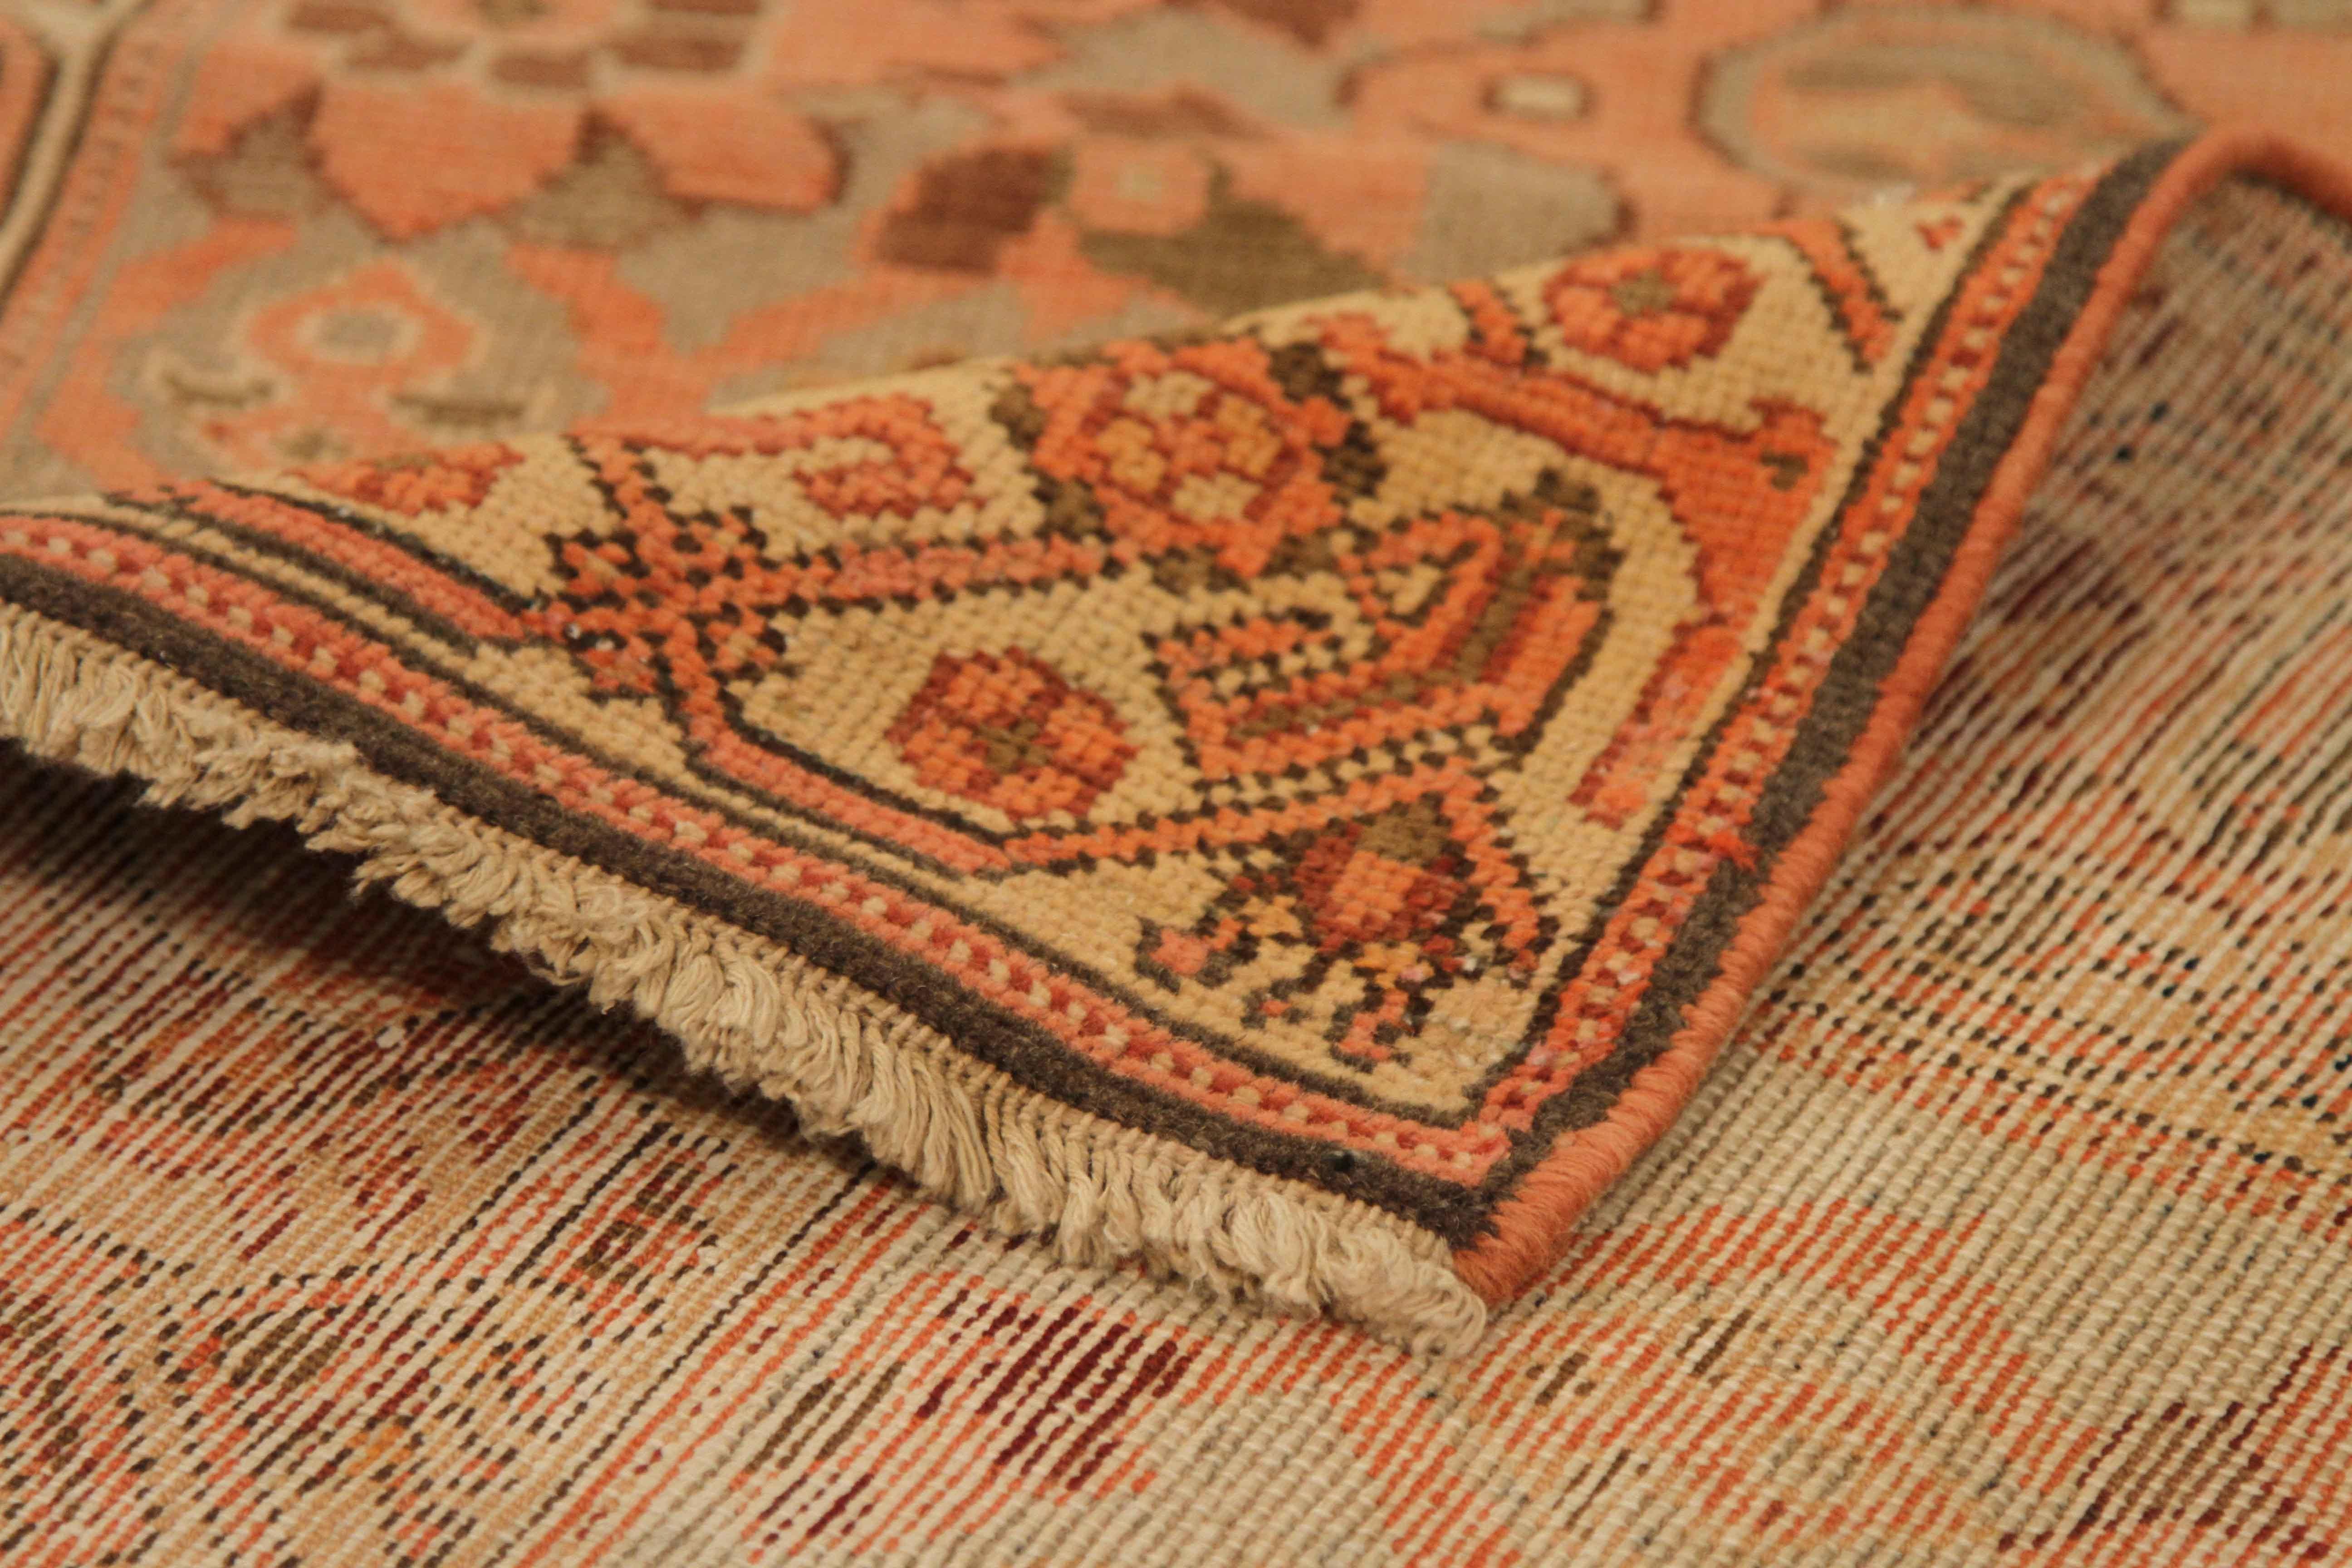 Crafted by hand using the finest wool, this antique Persian rug was designed based on patterns mastered by Malayer weavers thousands of years ago. It has a well-blended color mix of beige, ivory, green, and red which lend the appearance of a flower